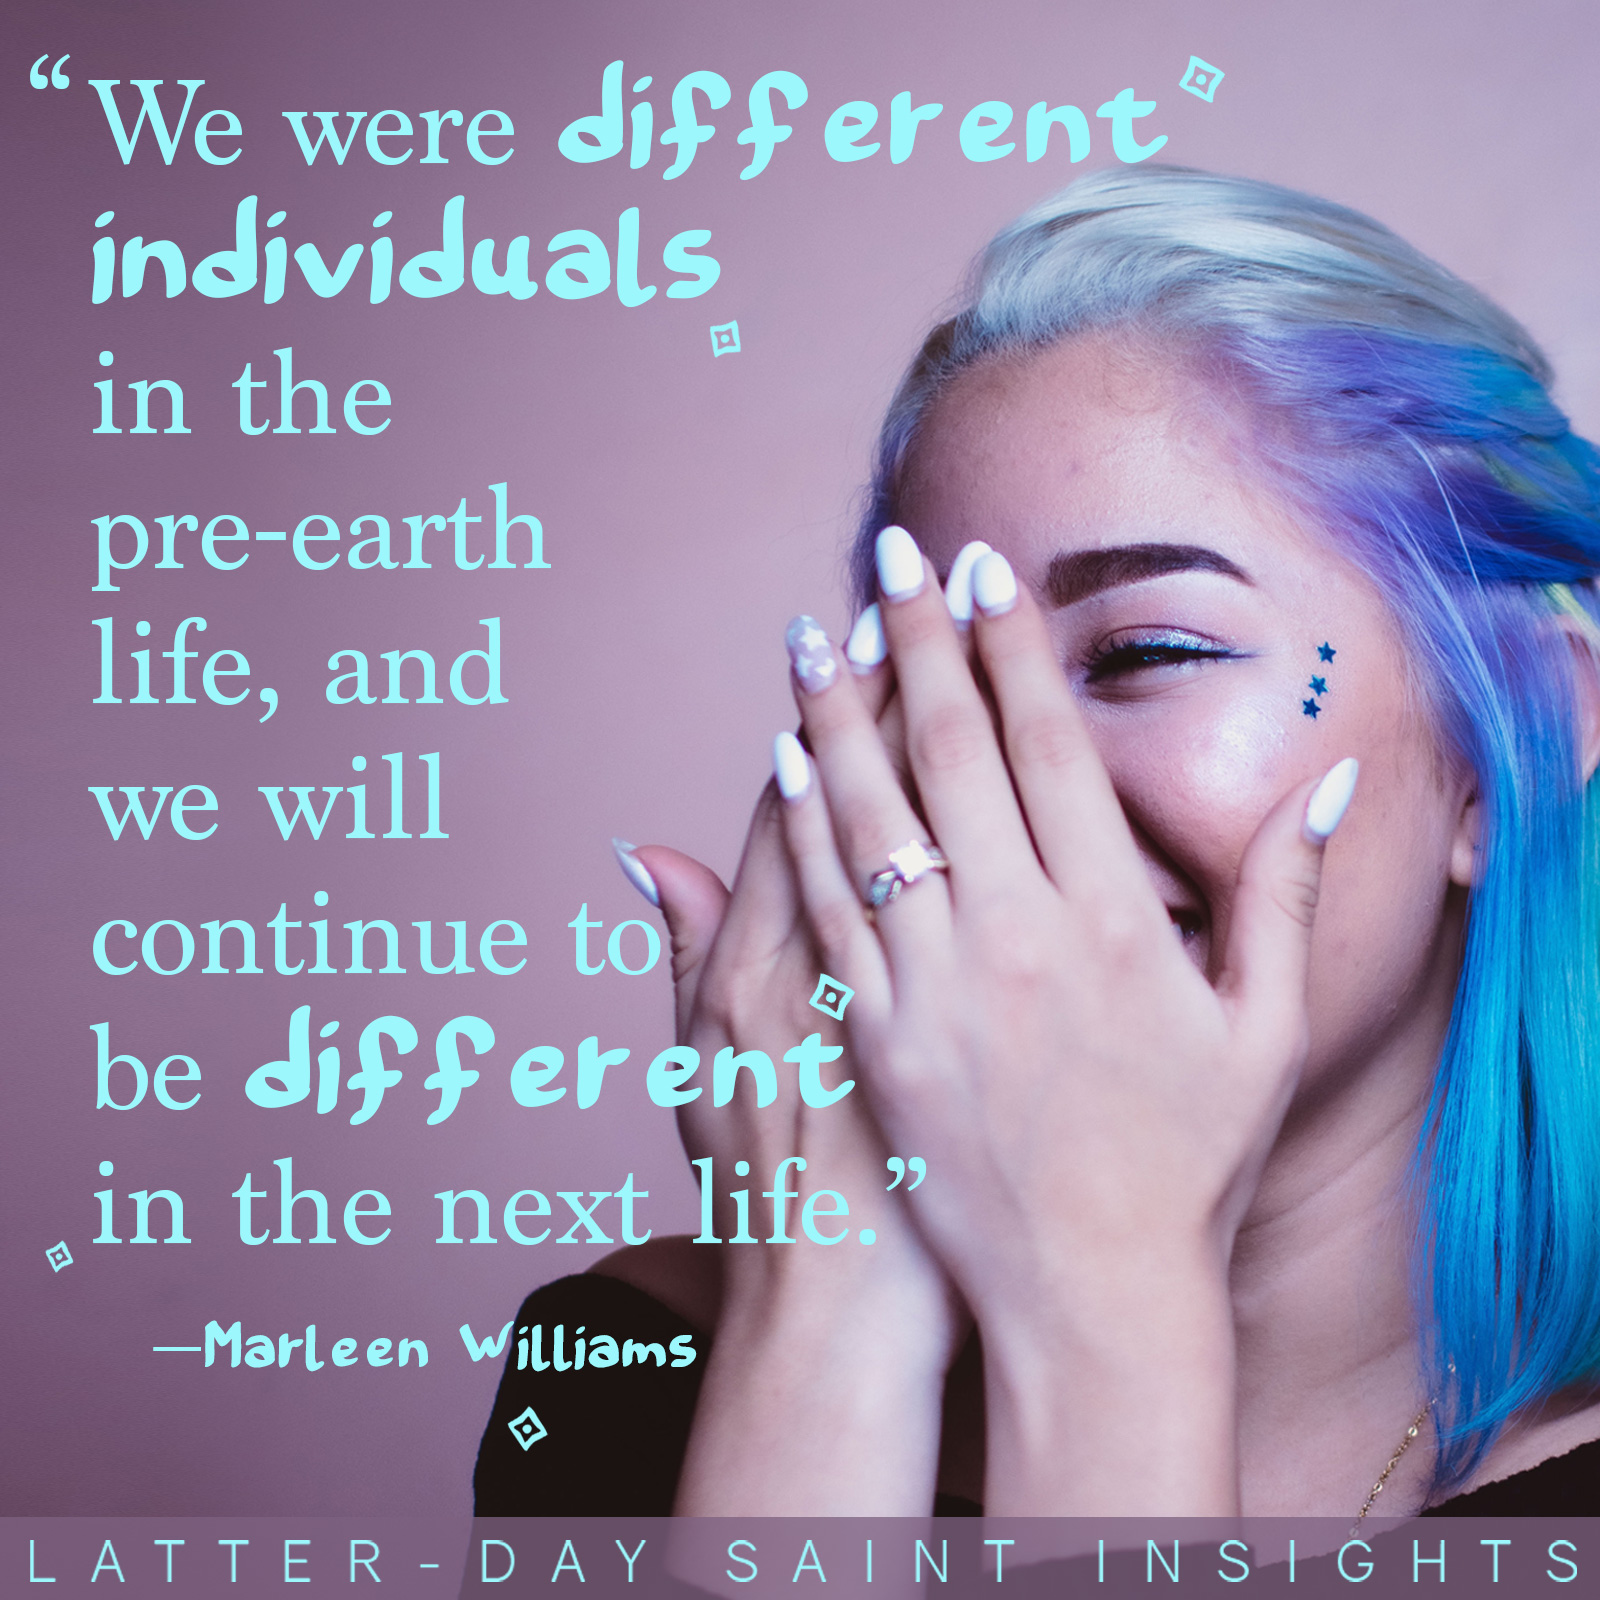 Smiling woman with a quote by Marleen Williams that says, "We were different individuals in the pre-earth life, and we will continue to be different in the next life."